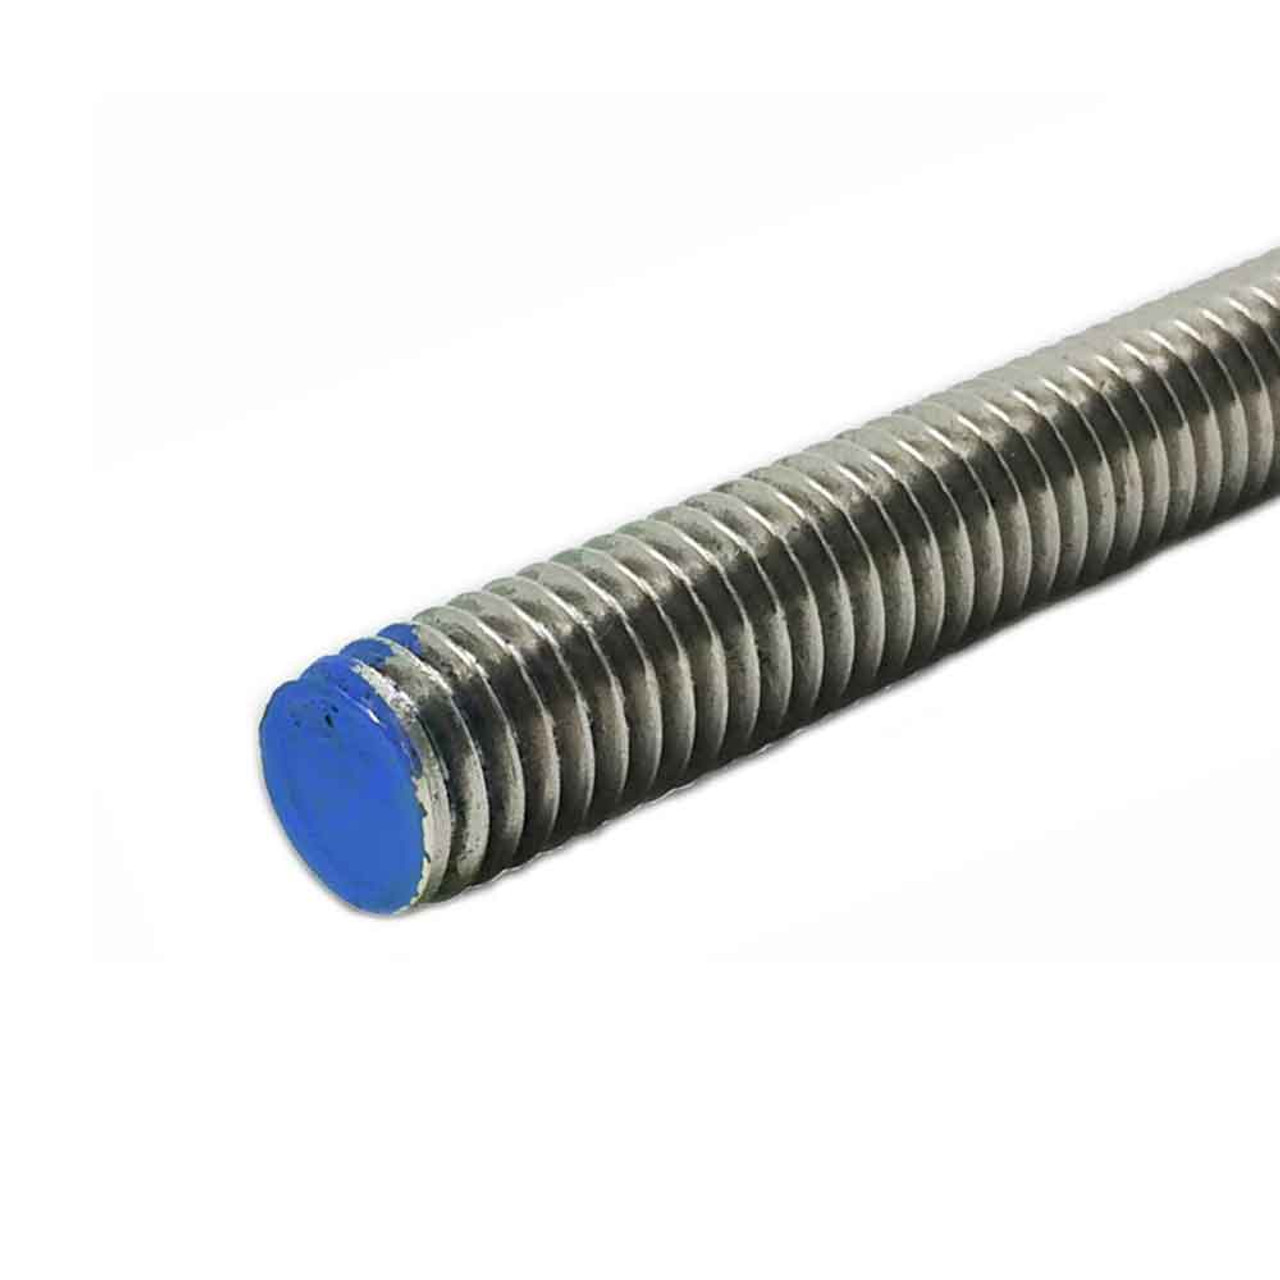 3/8 inch - 16 TPI, Length: 12 inches, Stainless Steel Fully Threaded Rod